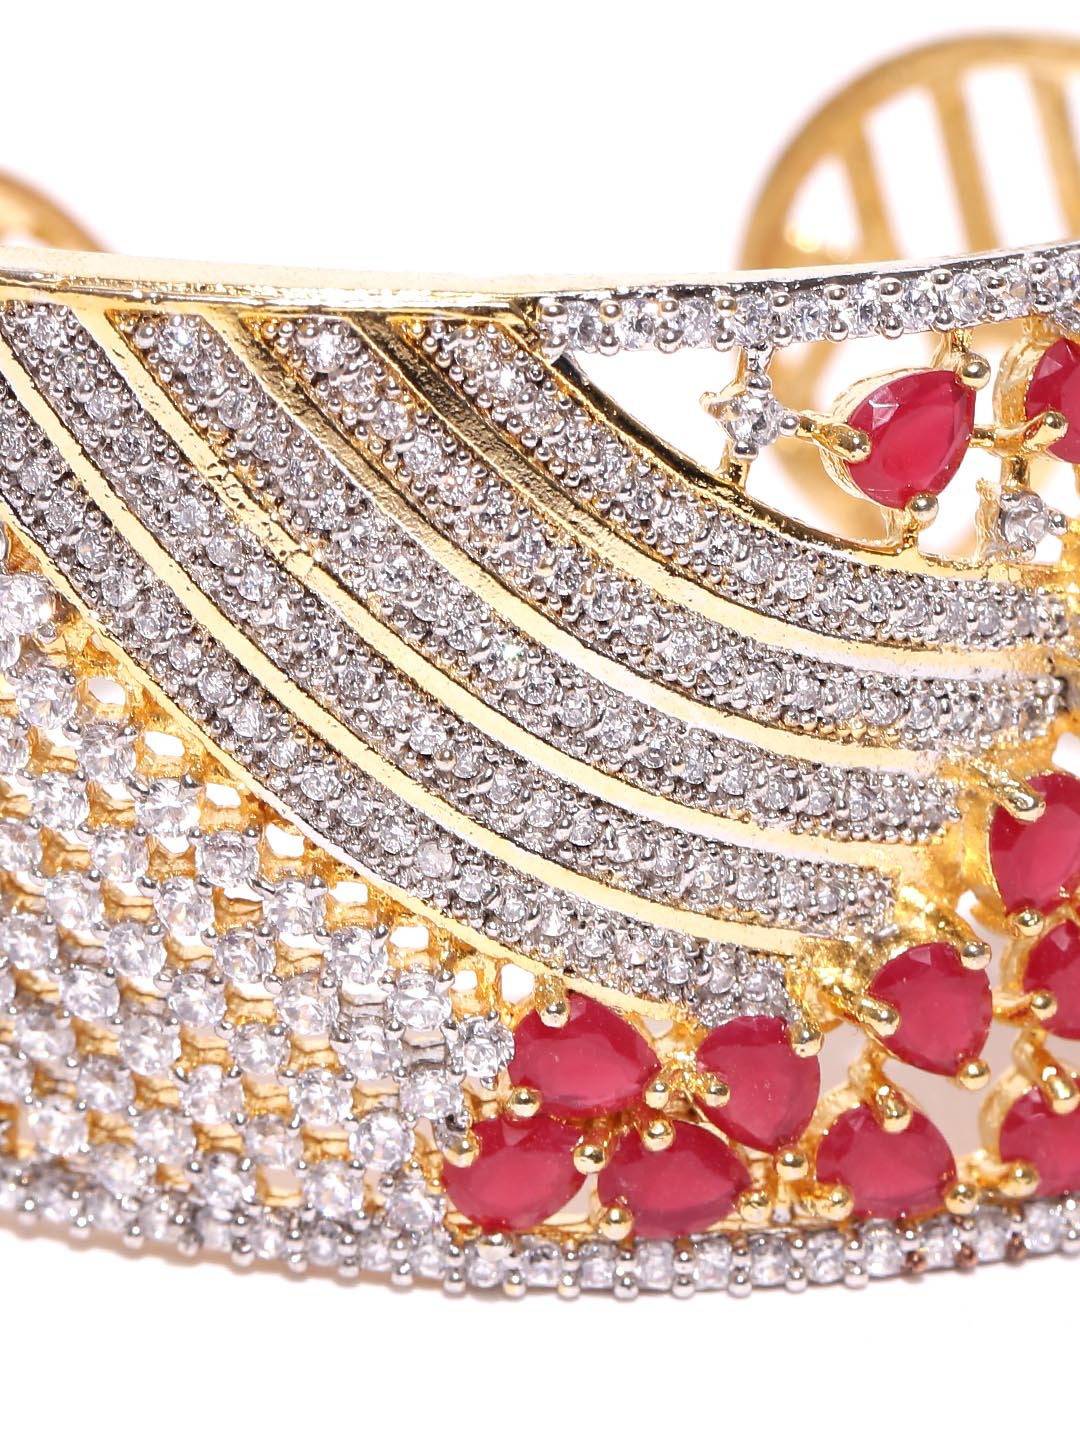 Gold-Plated Ruby and American Diamond Studded Cuff Bracelet in Magenta Color